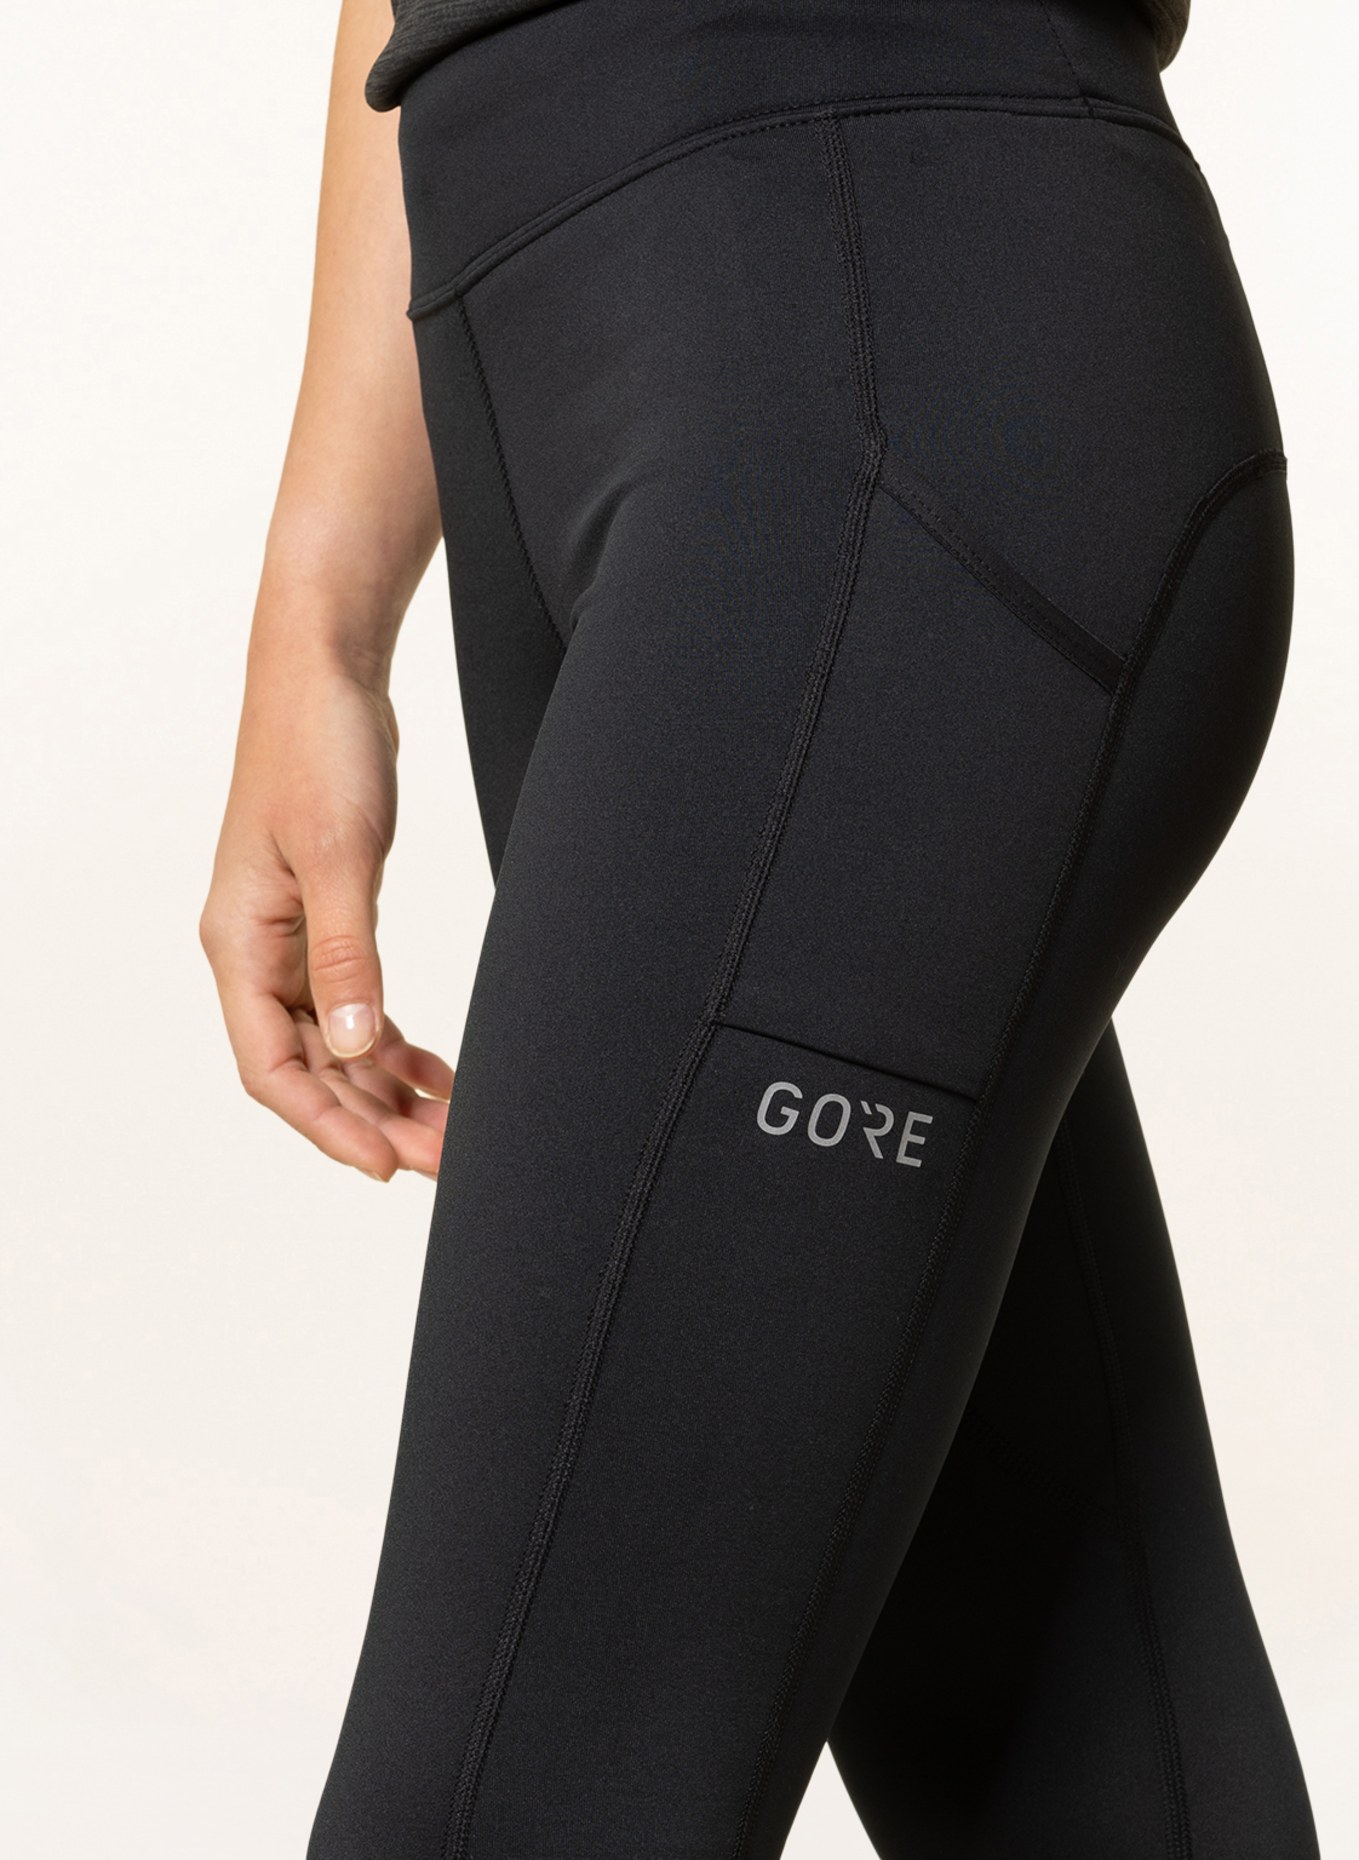 GORE RUNNING WEAR 7/8 tights R3, Color: BLACK (Image 5)